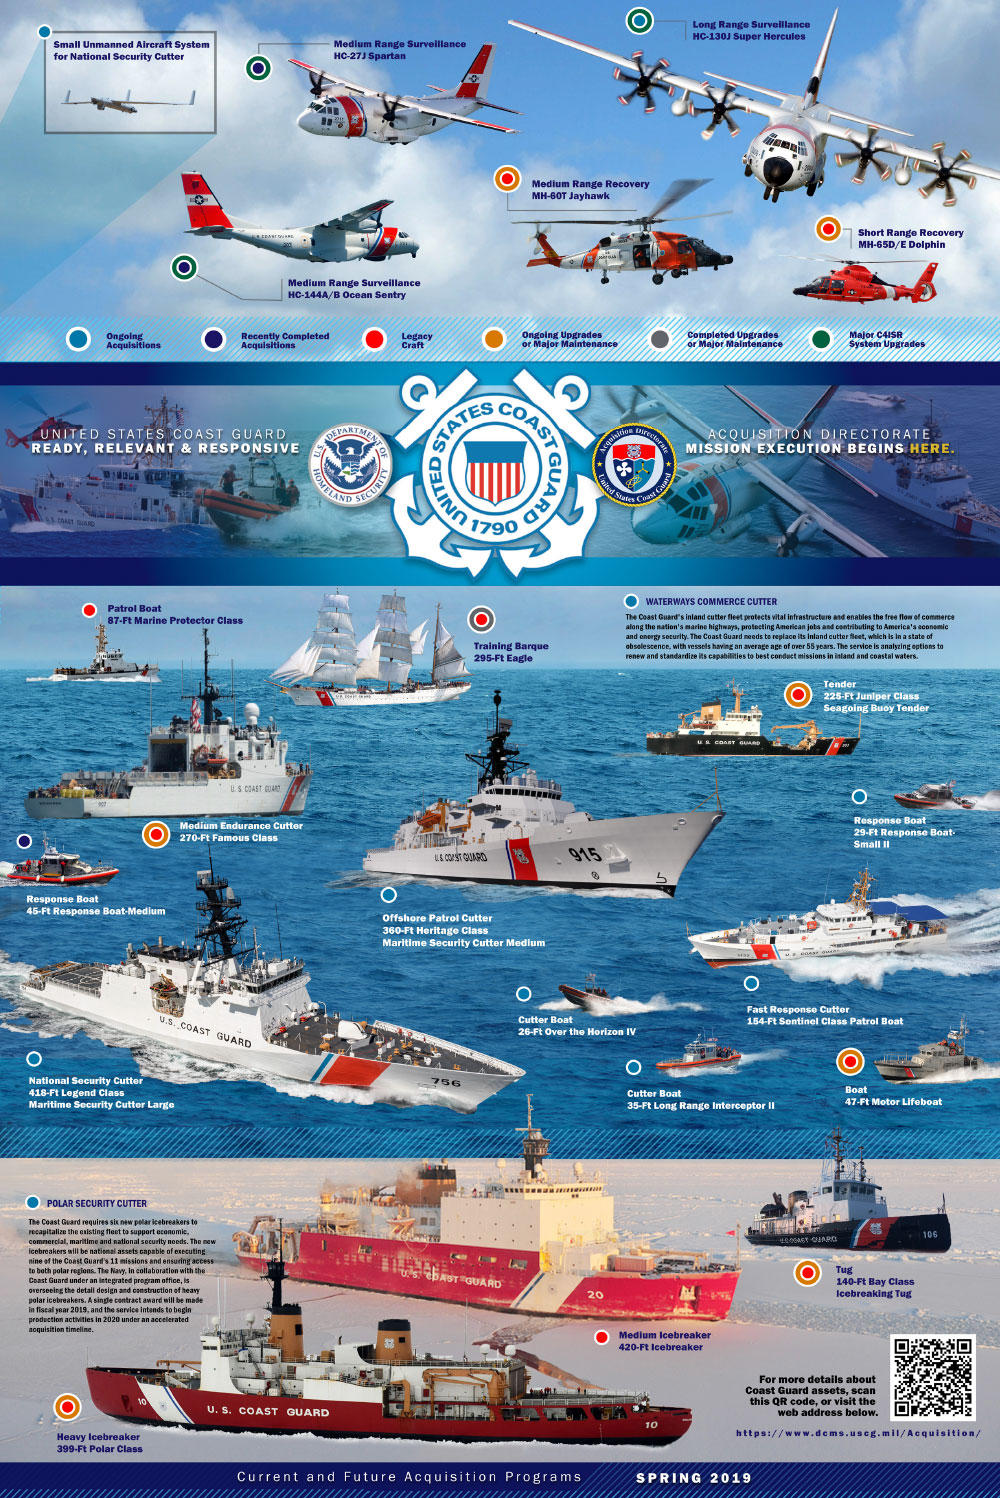 United States Coast Guard current and future acquisition programs